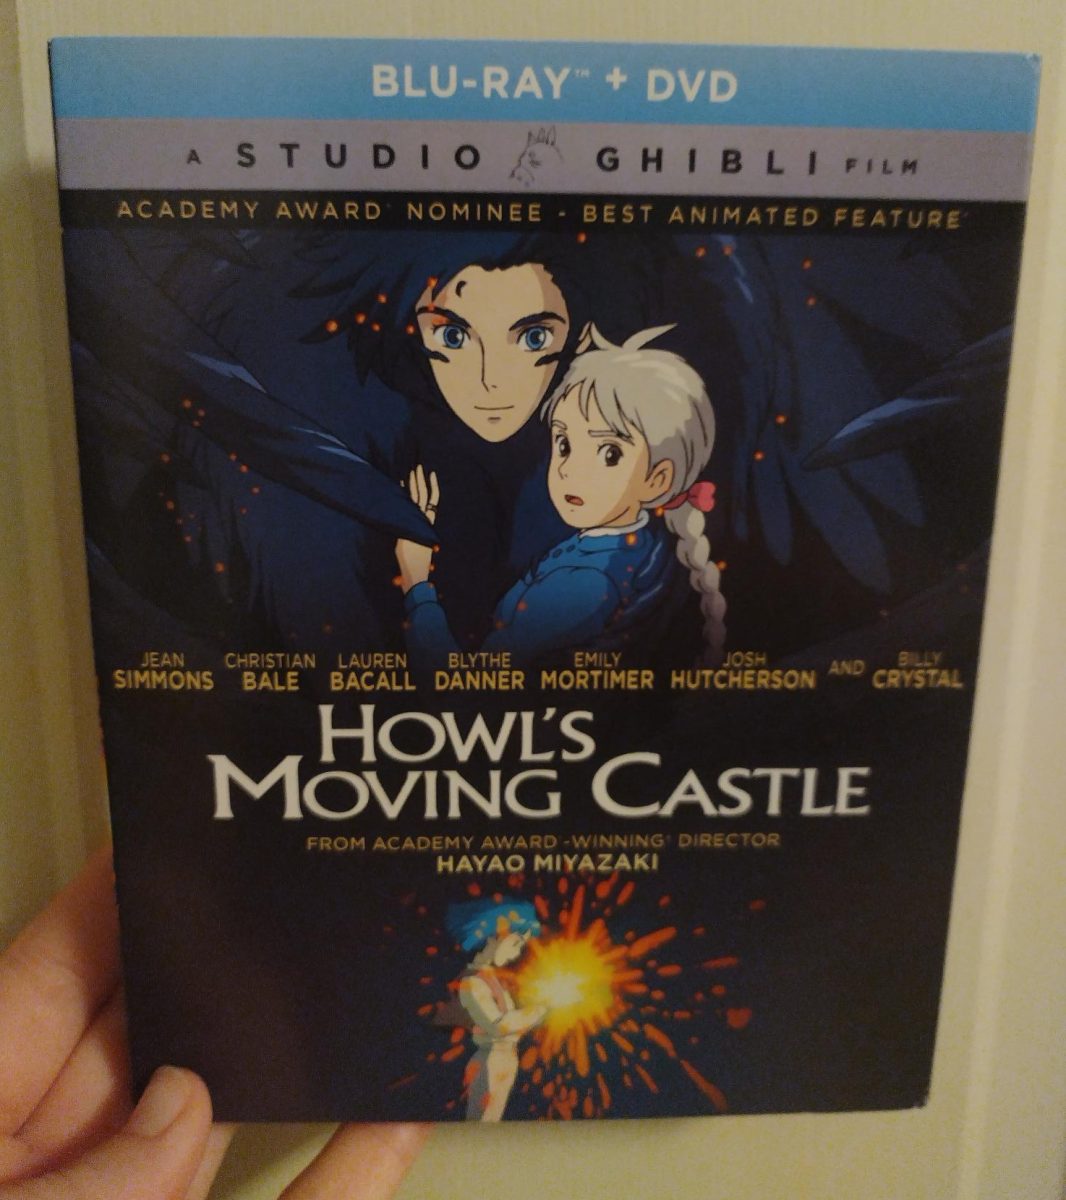 Howls Moving Castle is back in theaters